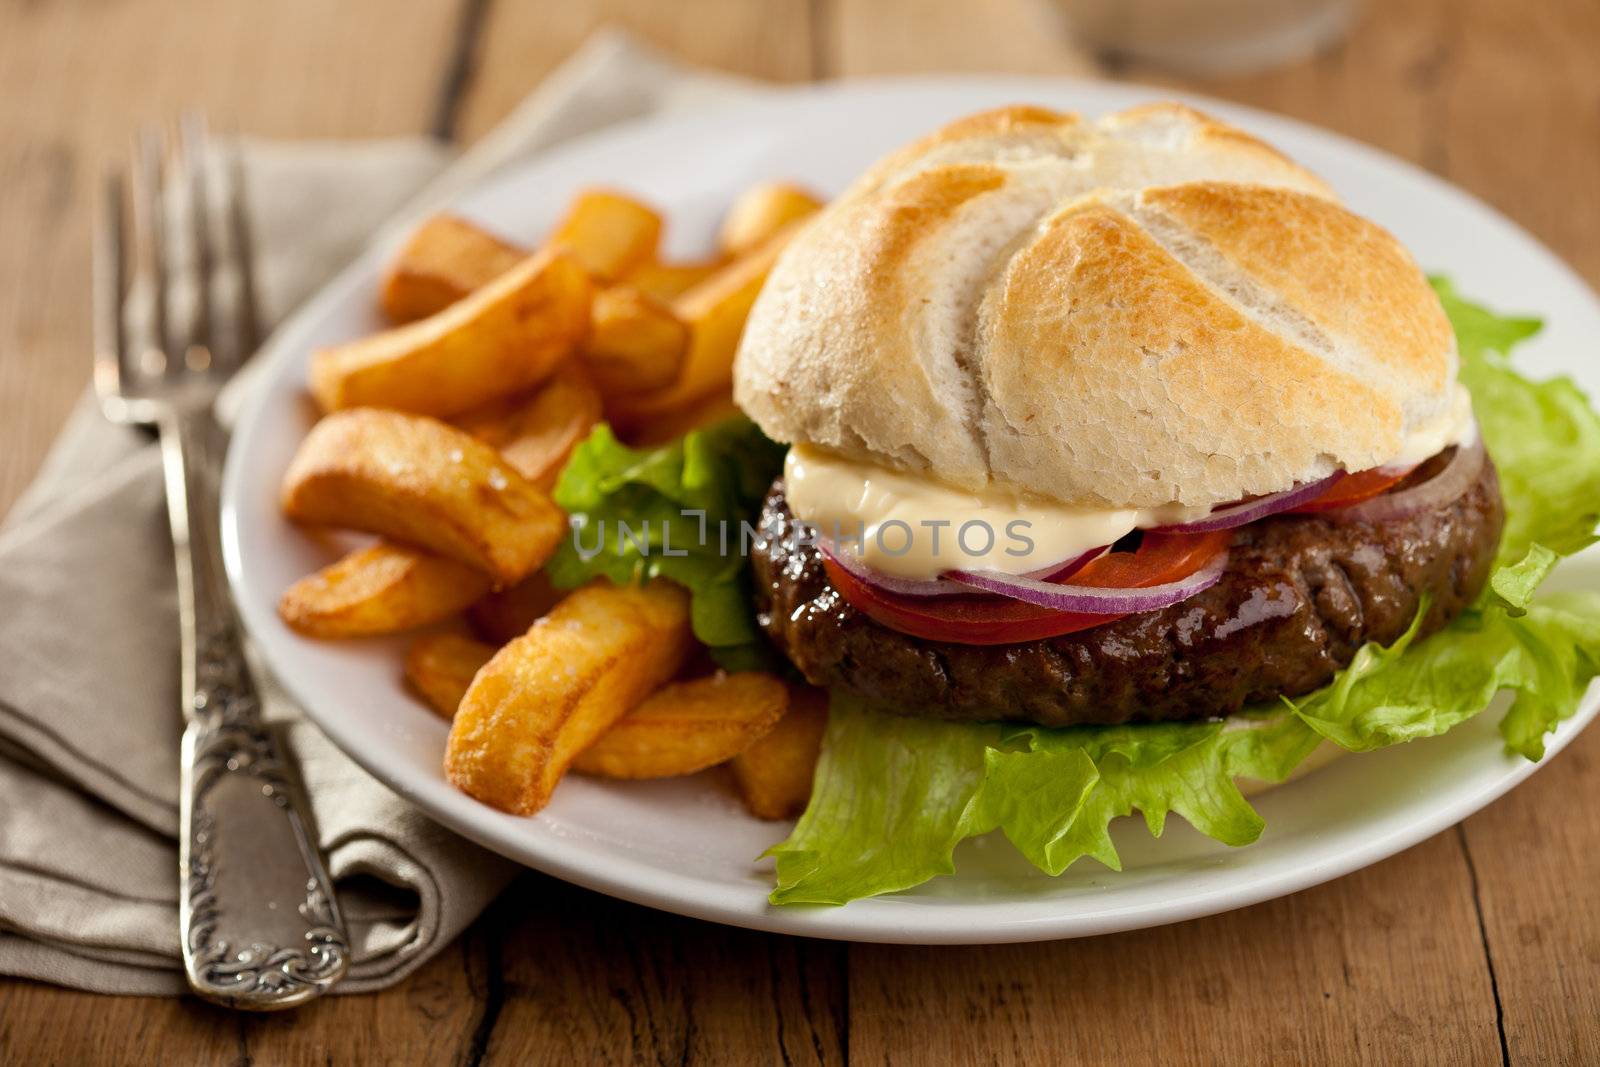 Hamburger with fries by Fotosmurf